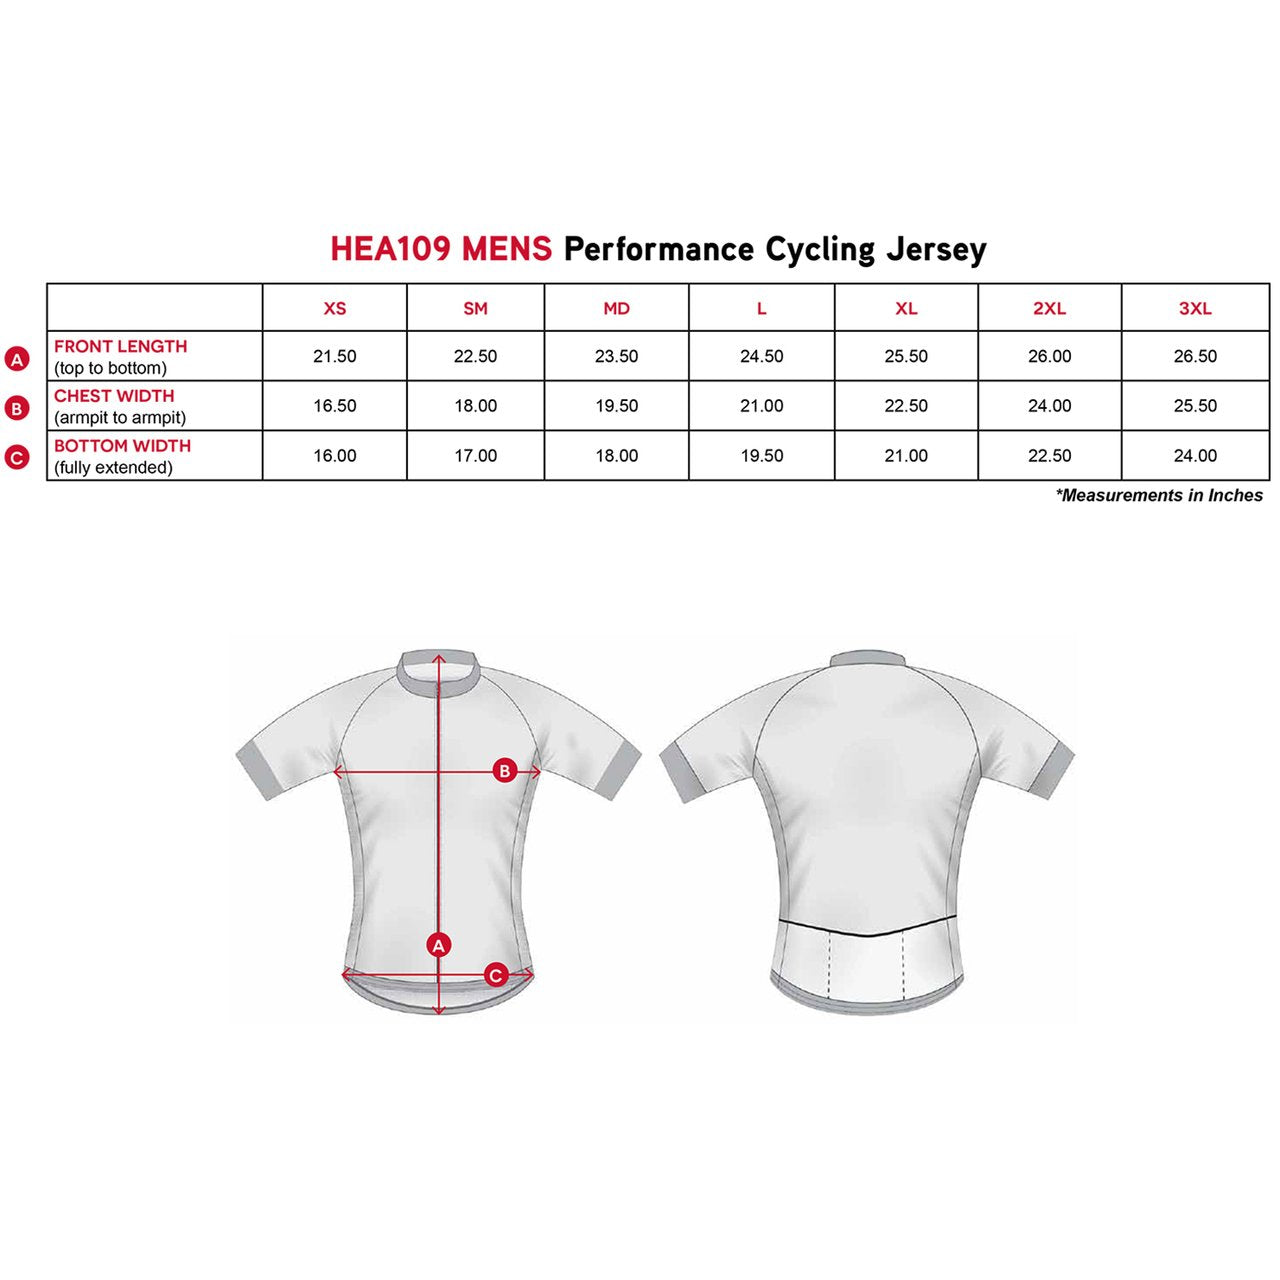 Floral ECO Men's Cycling Jersey